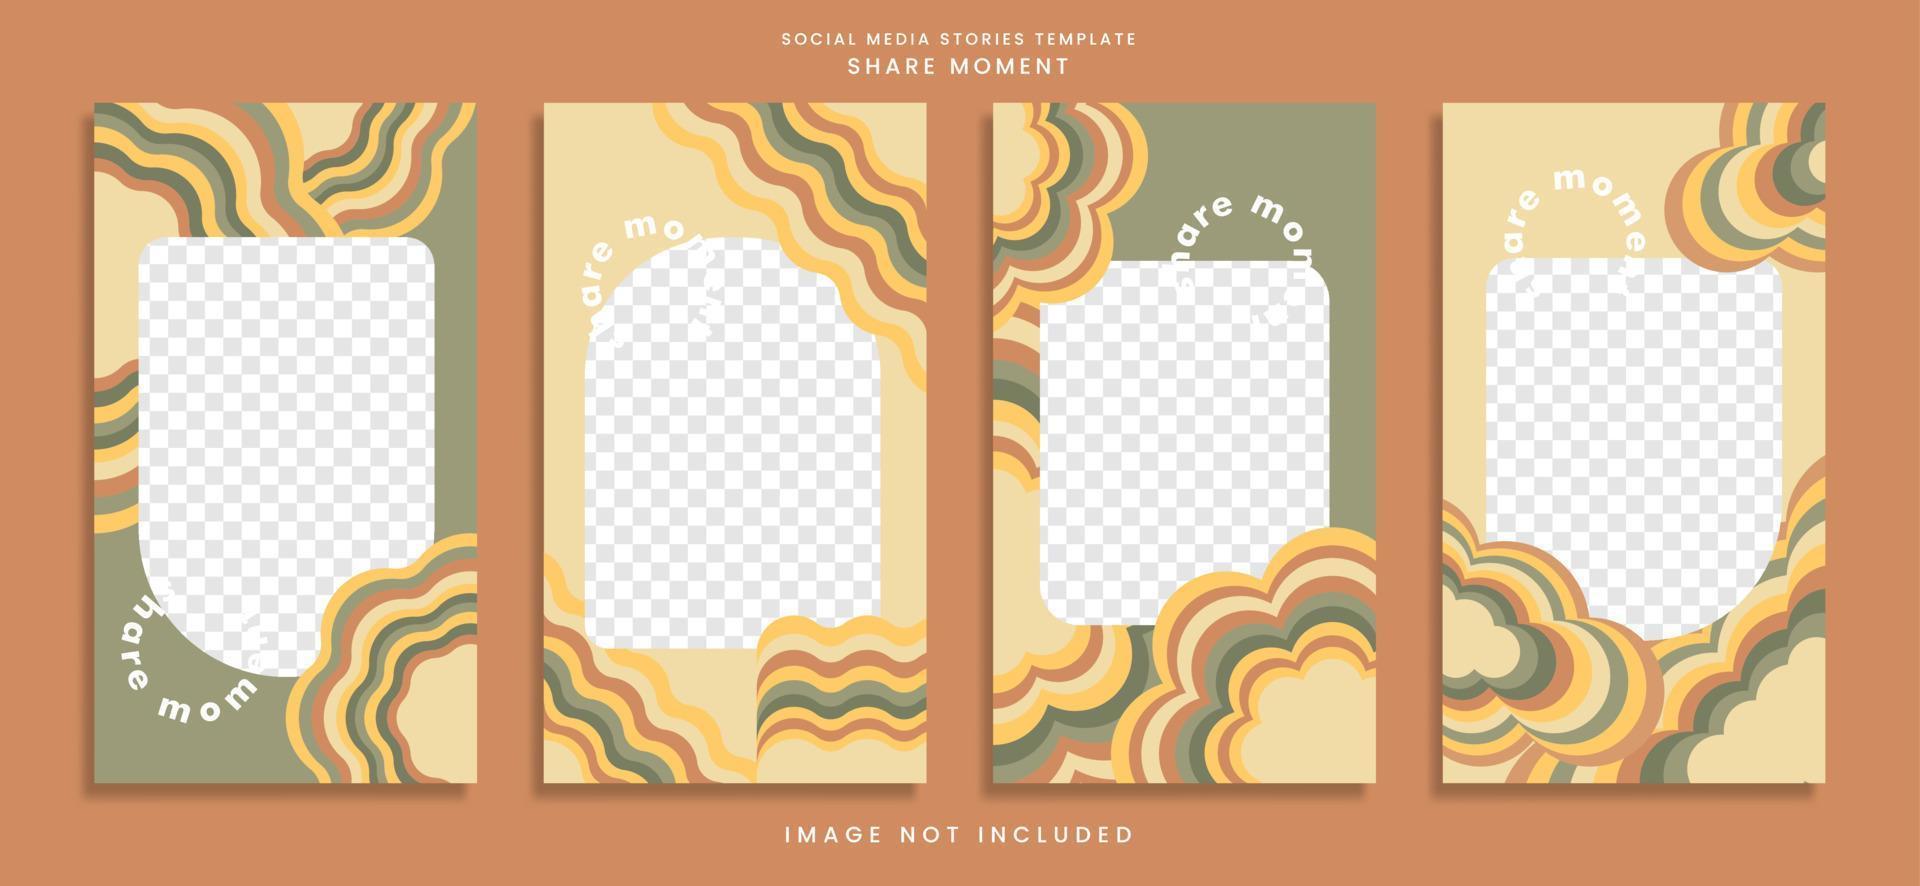 Groovy and fun, share moment, social media template vector